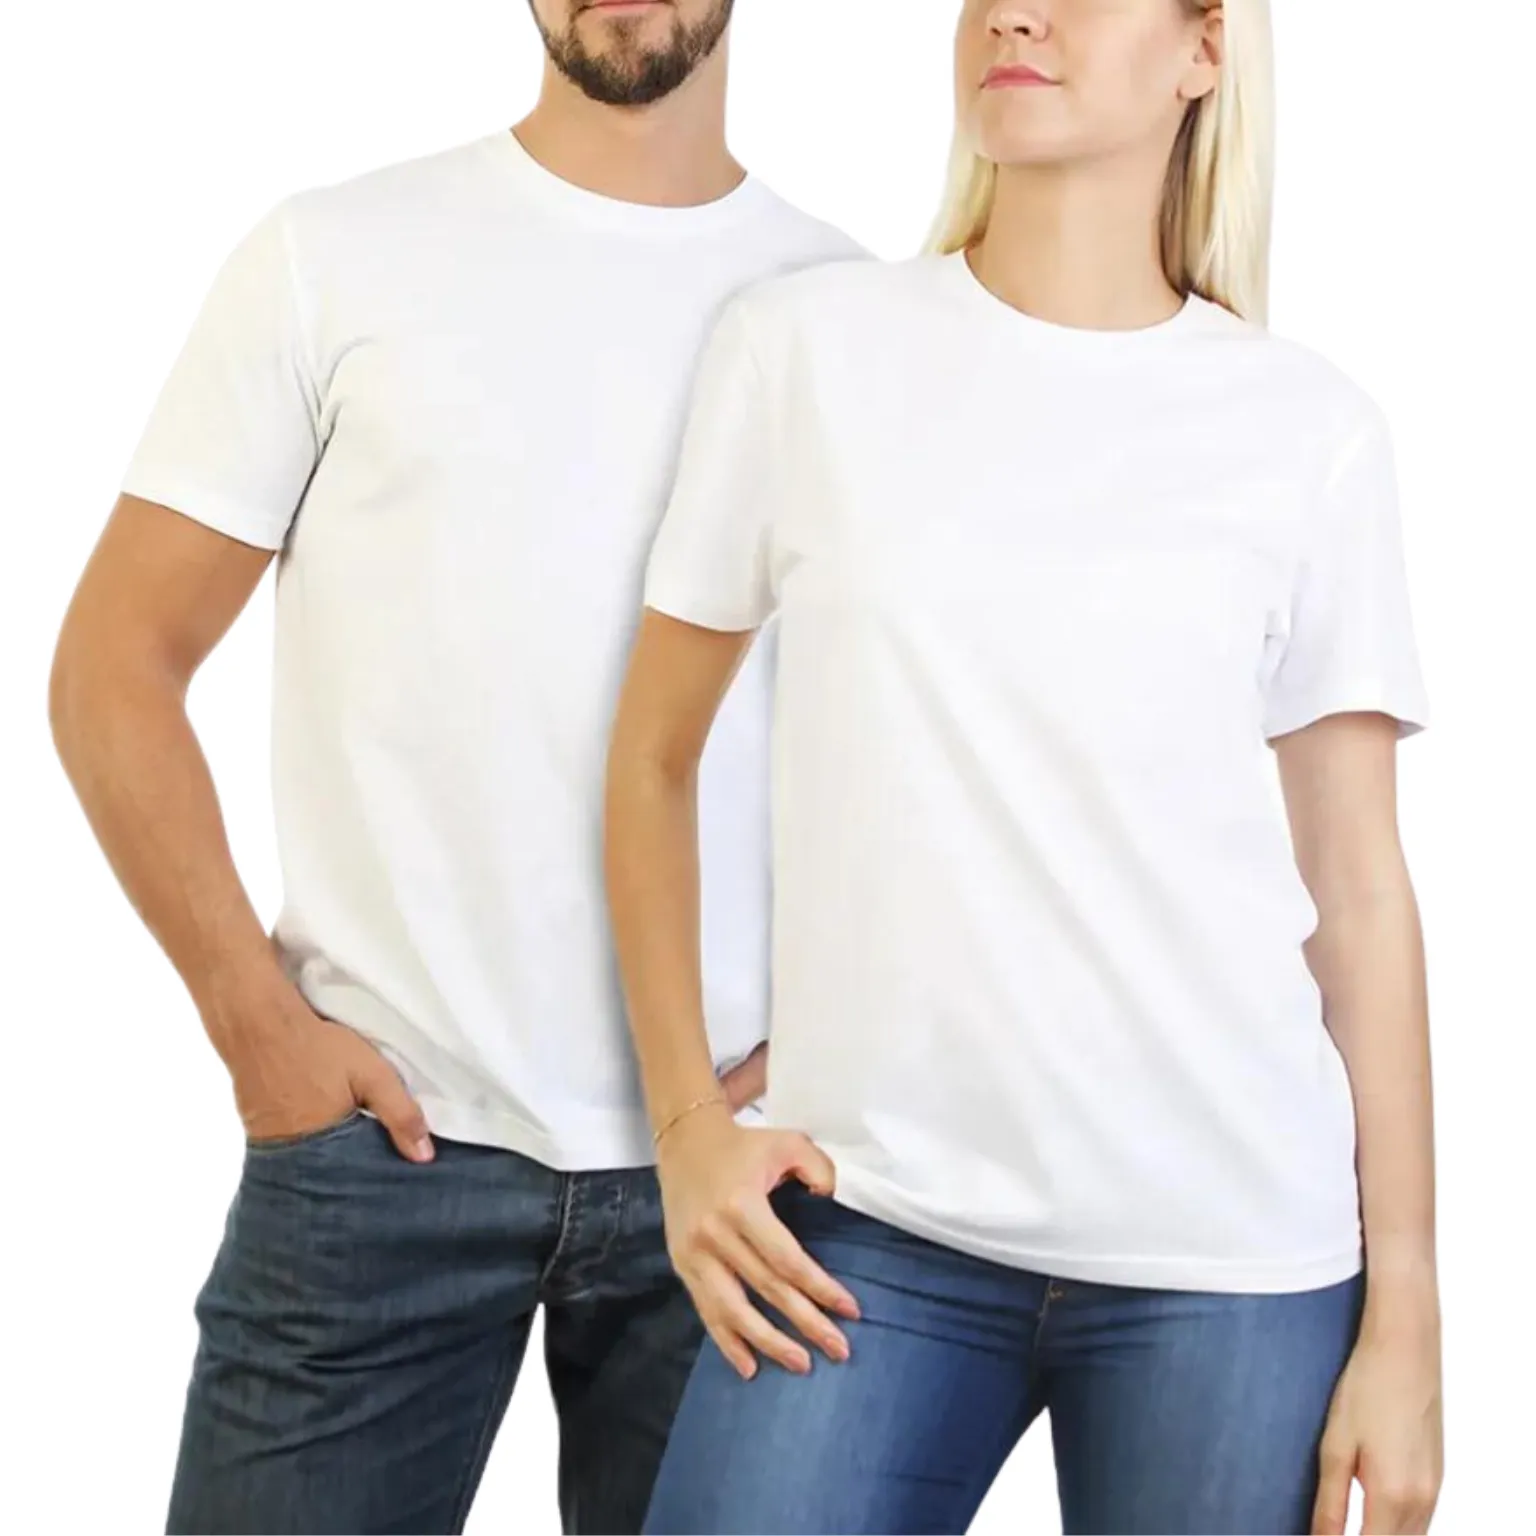 Unisex T-shirt manufacturing with recycled materials